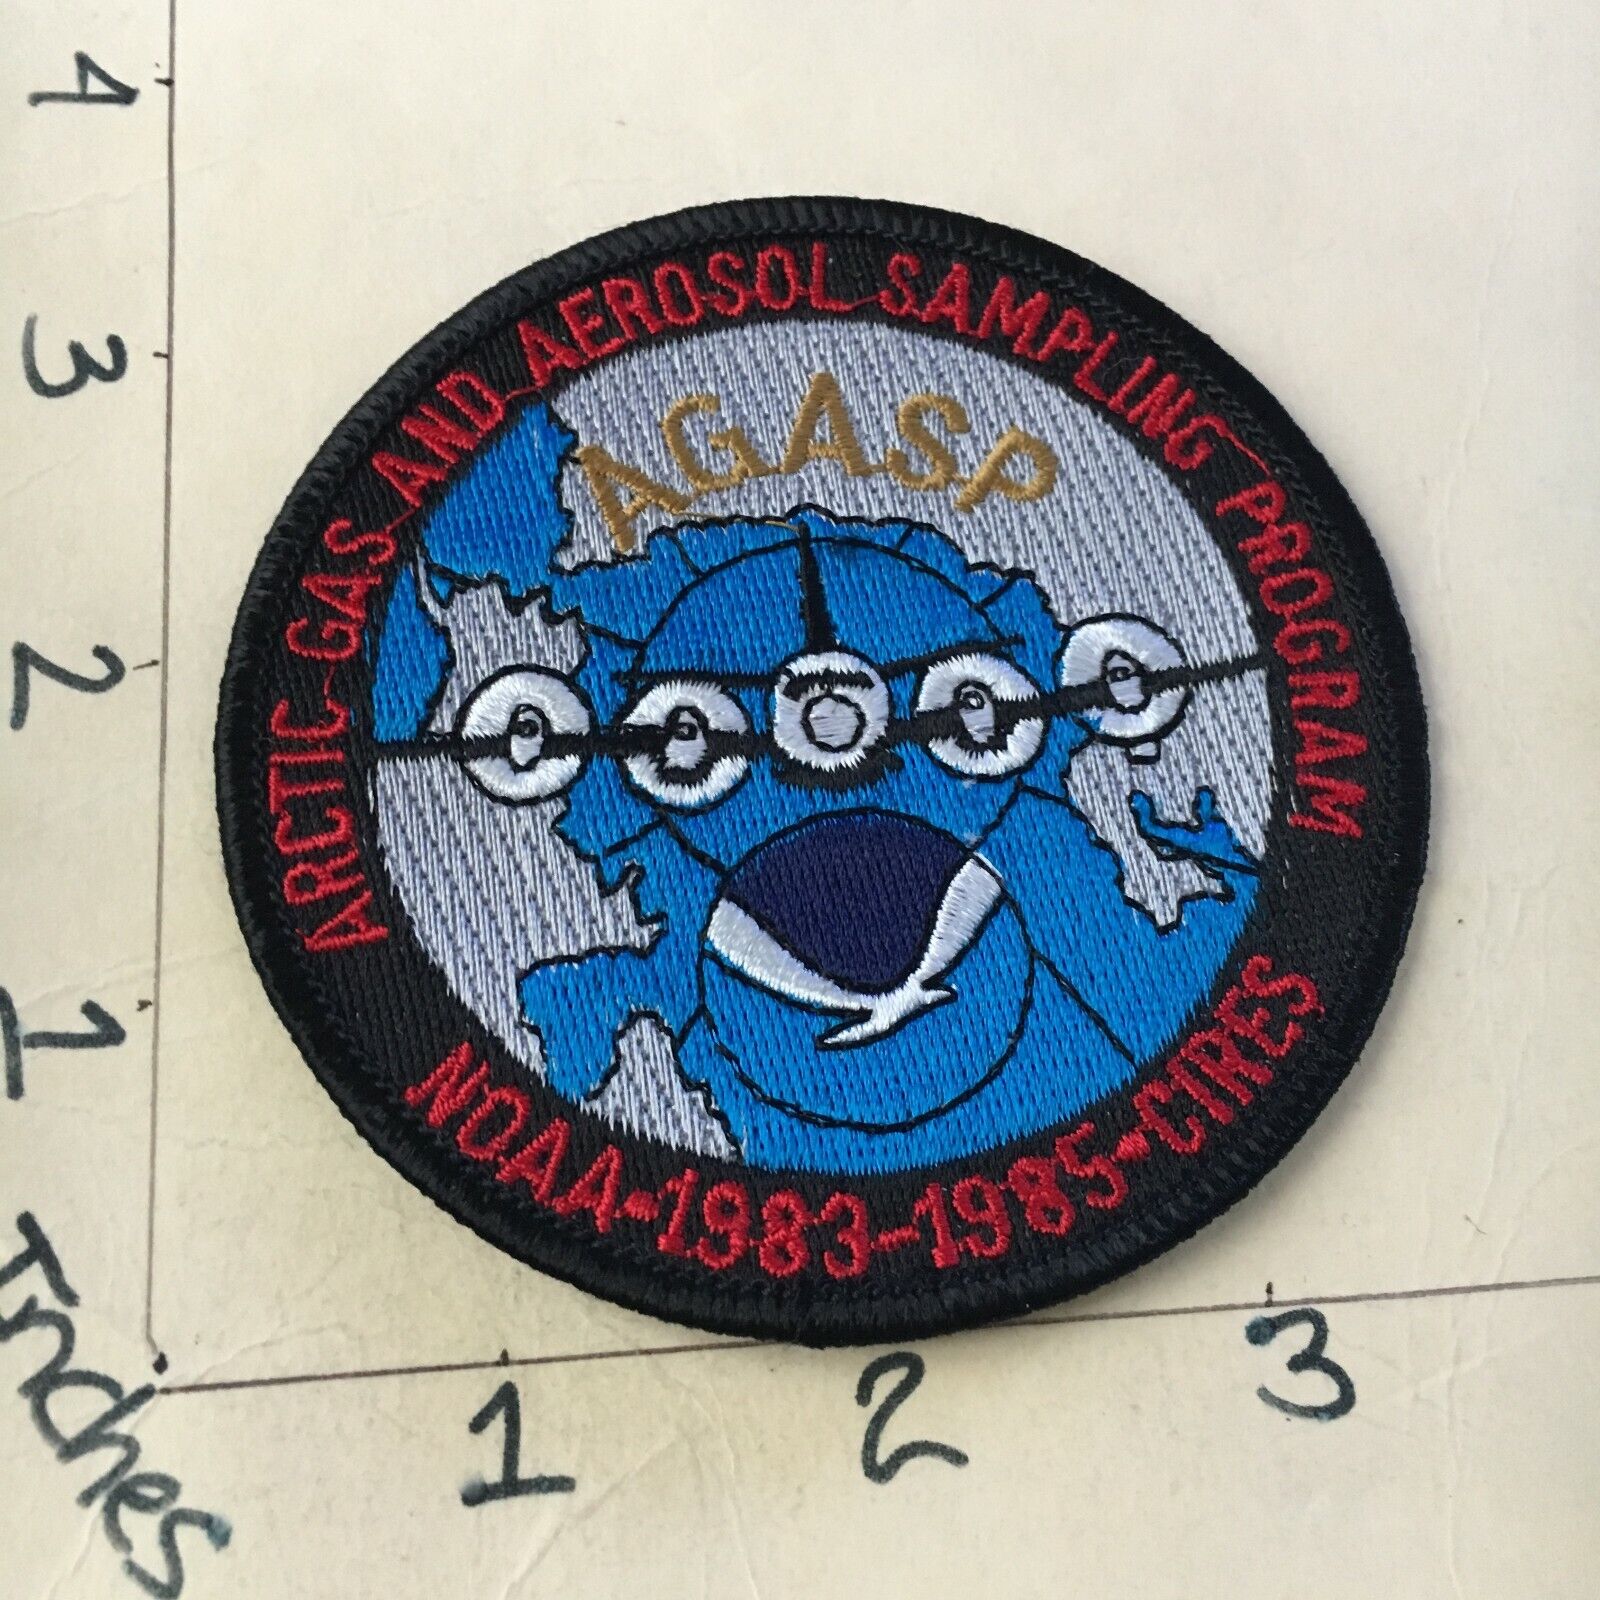 NOAA Patch 1983 - 1985 AGASP Climate Change Geophysical Monitoring Federal 4/13